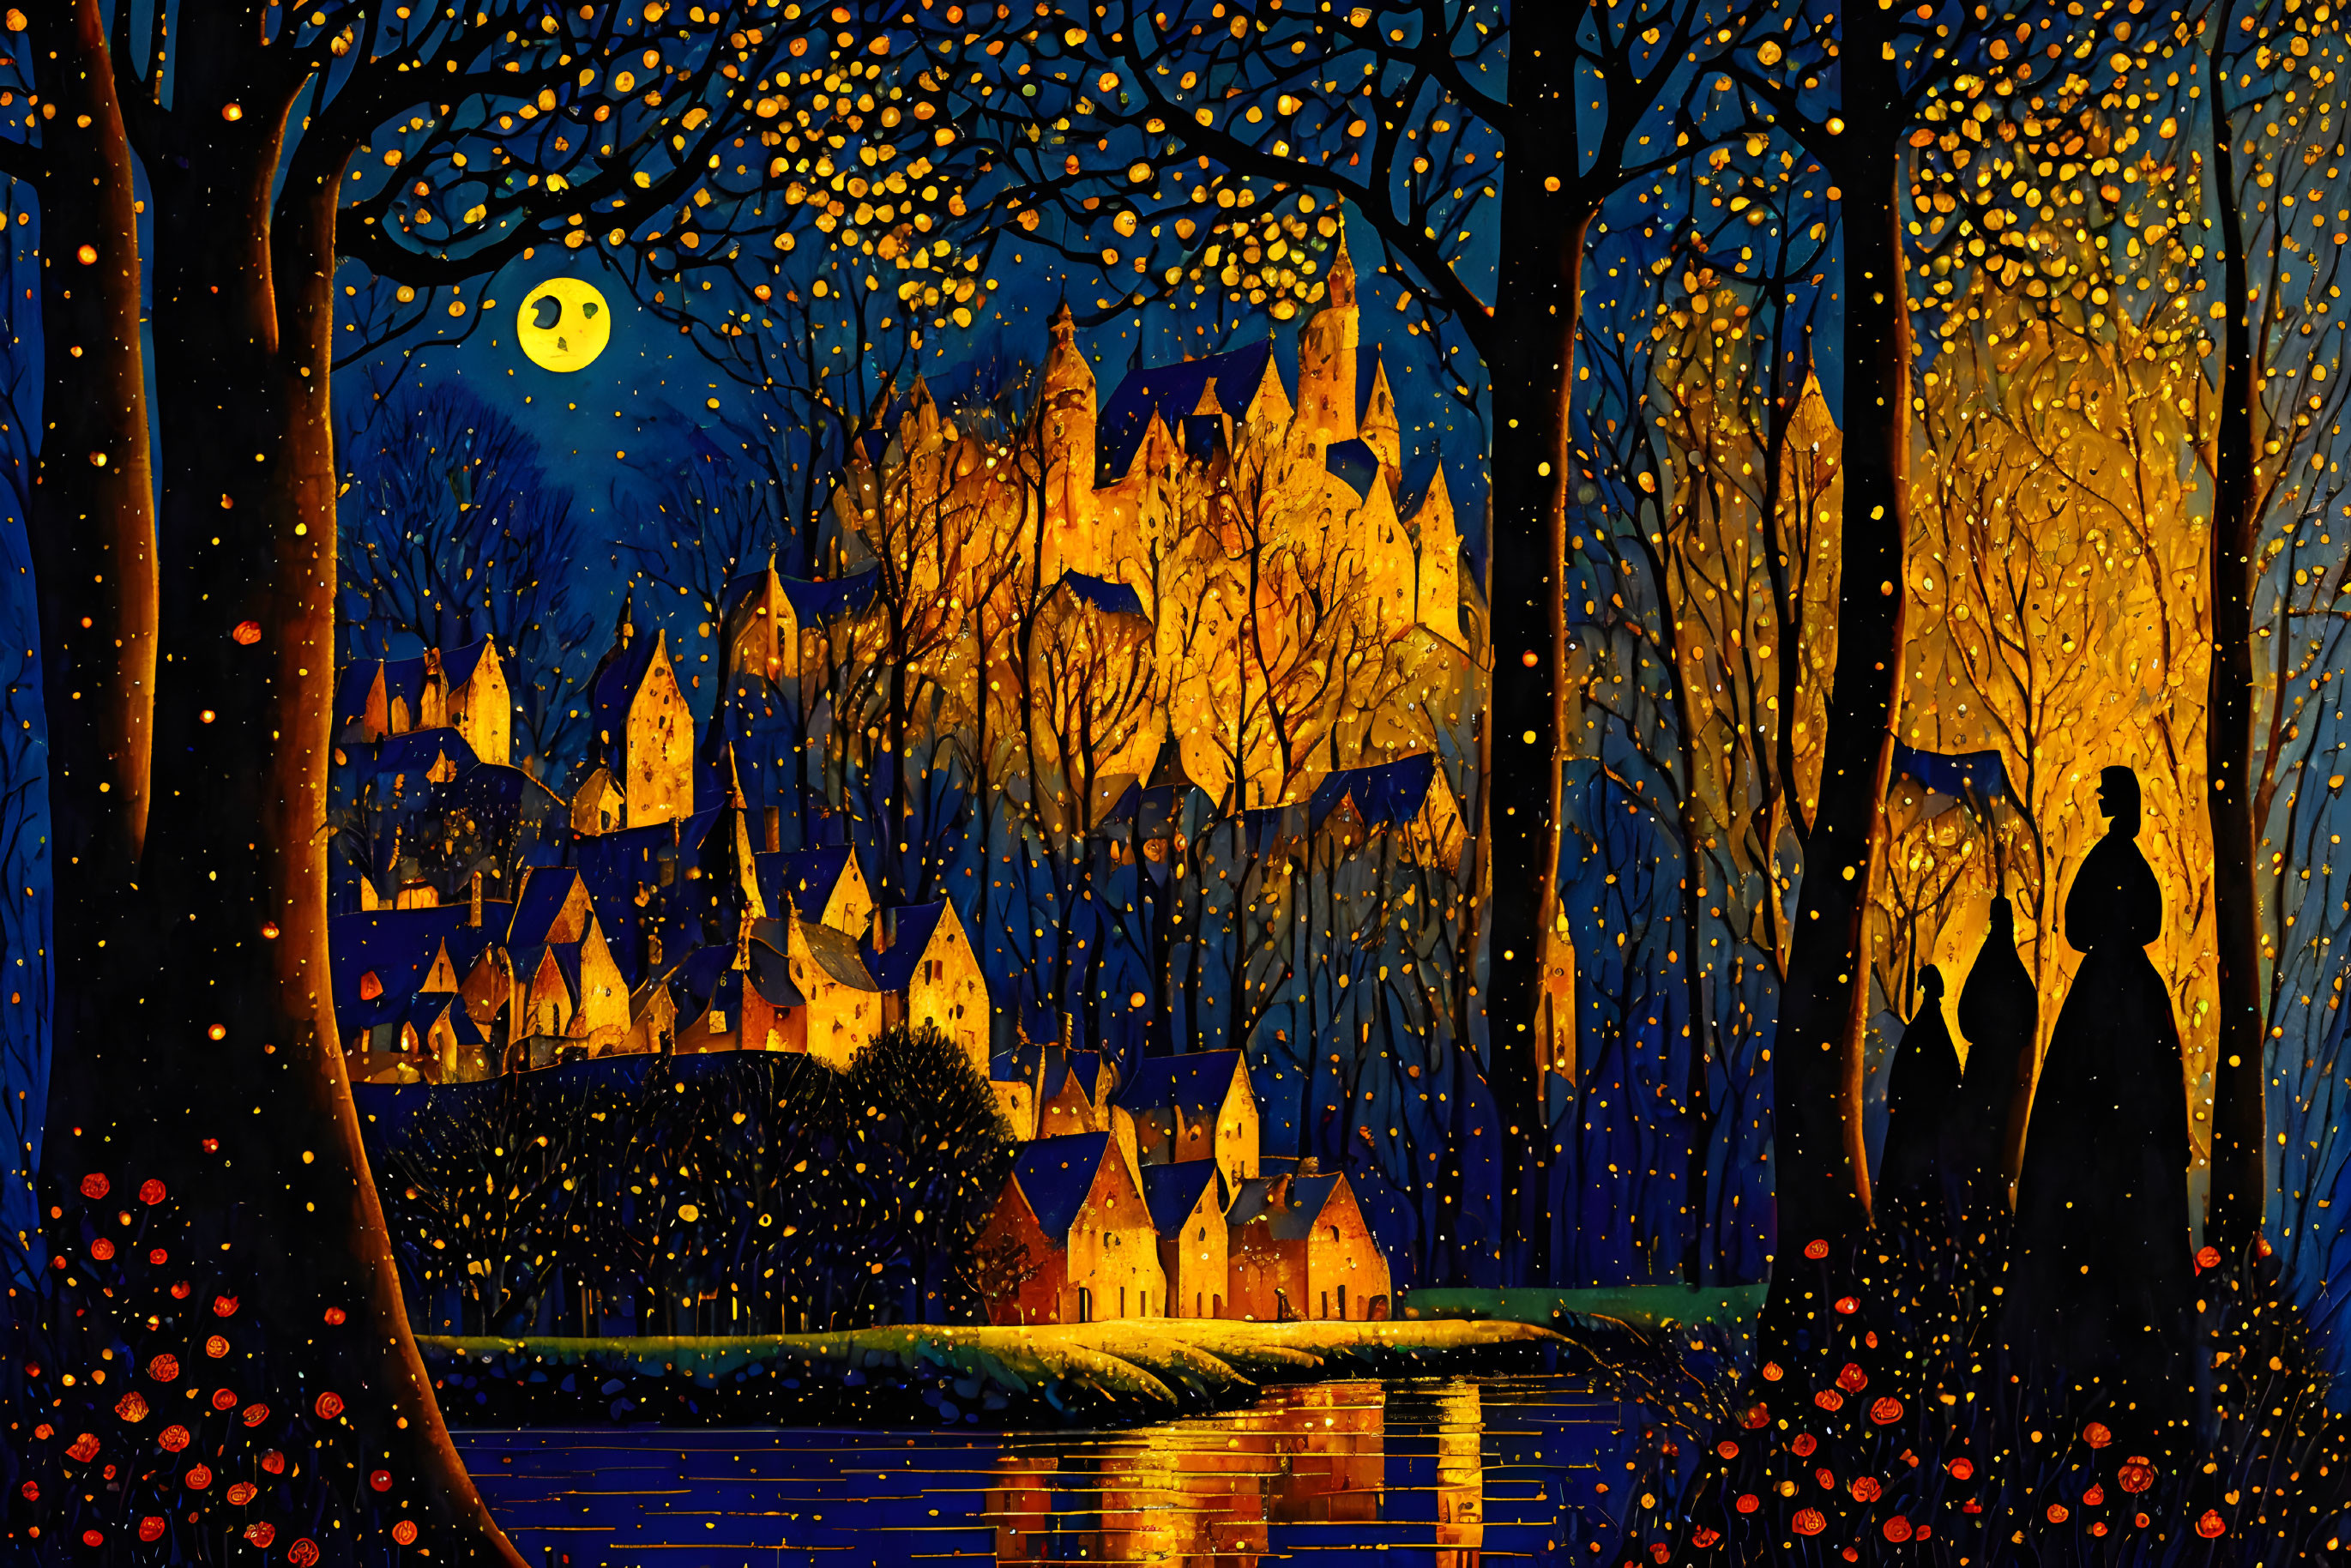 Fantastical painting of illuminated village at night with crescent moon, starry sky, and sil